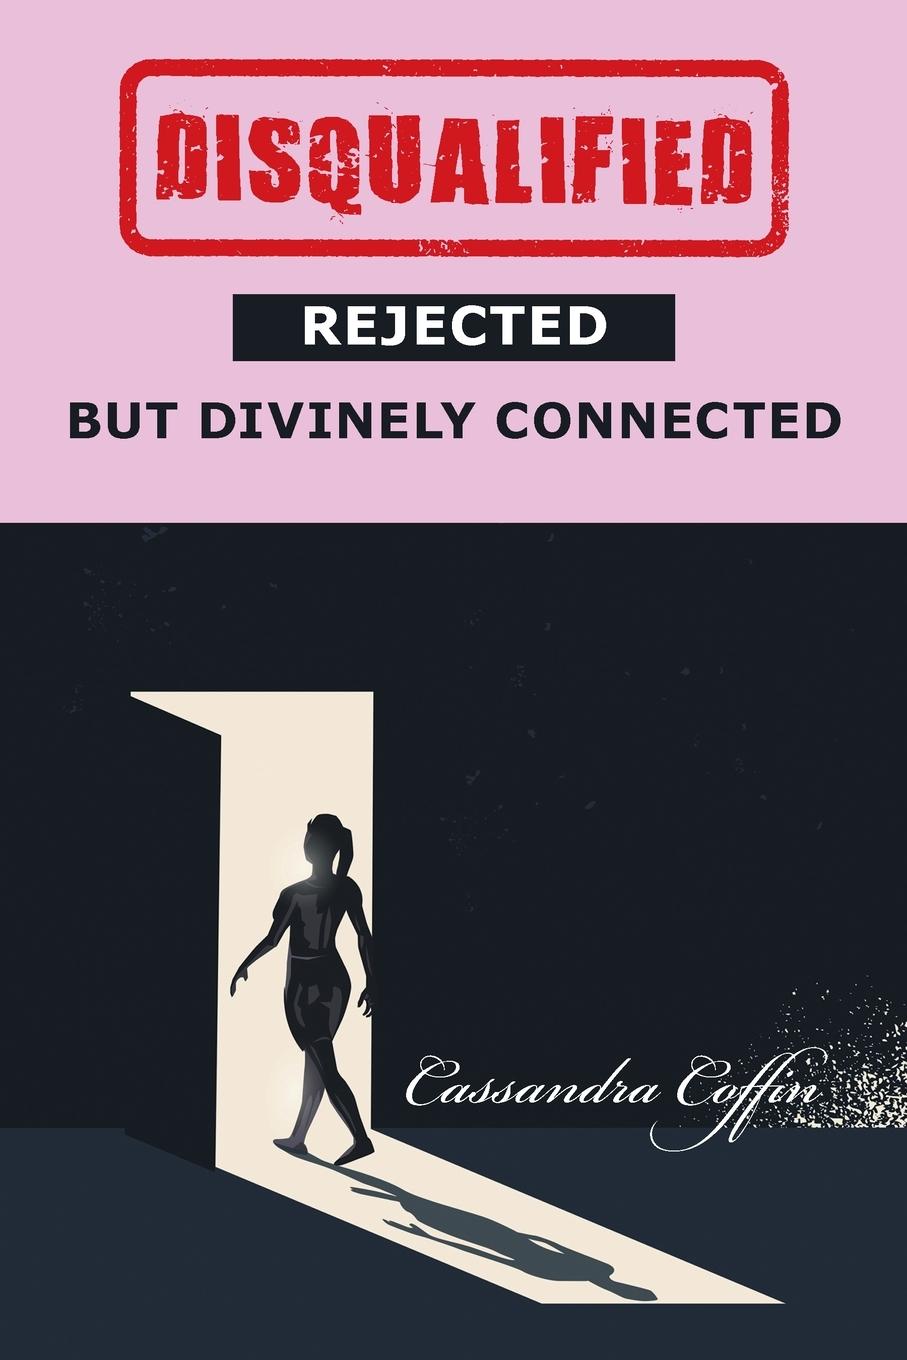 Carte Disqualified, Rejected, but Divinely Connected CASSANDRA COFFIN